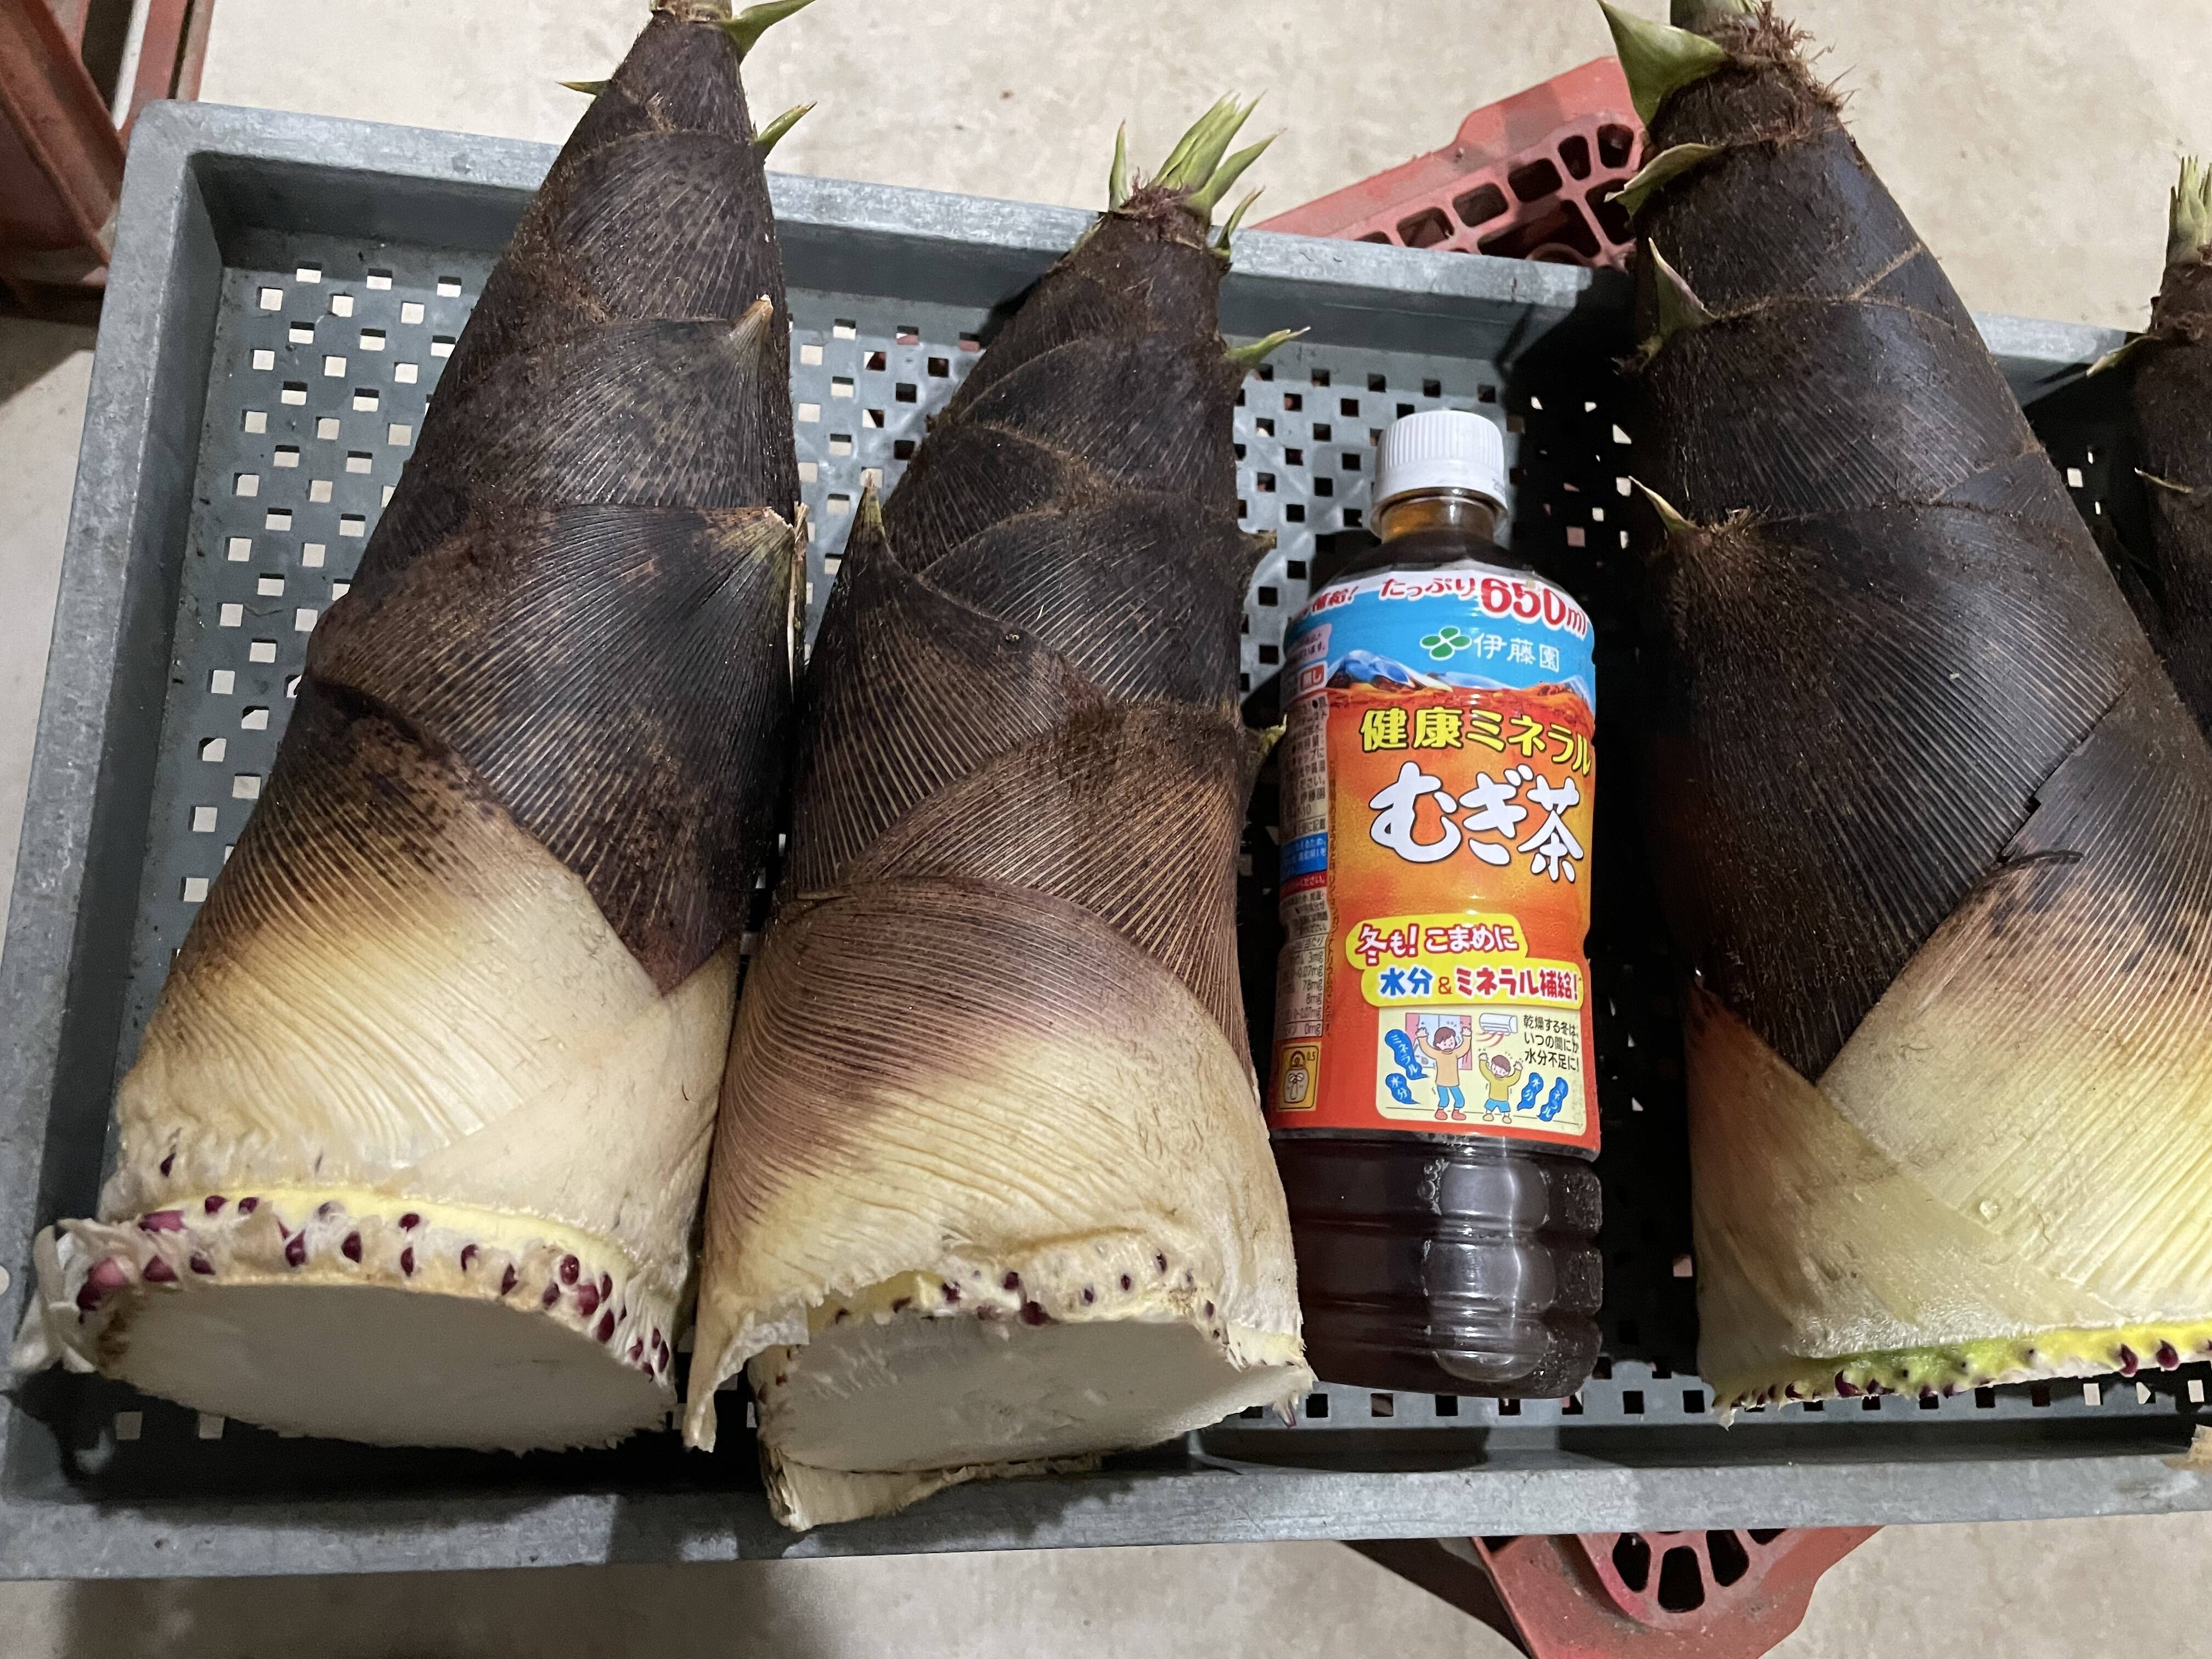 🍴 Eat choku ｜ [Bamboo shoots without pesticides and chemical fertilizers] Confidence in the taste of around 4 kg!Bamboo shoots from Tanba, Hyogo Prefecture Limited to this time! !With rice bran◎Bamboo shoots Various sizes Freshly harvested…